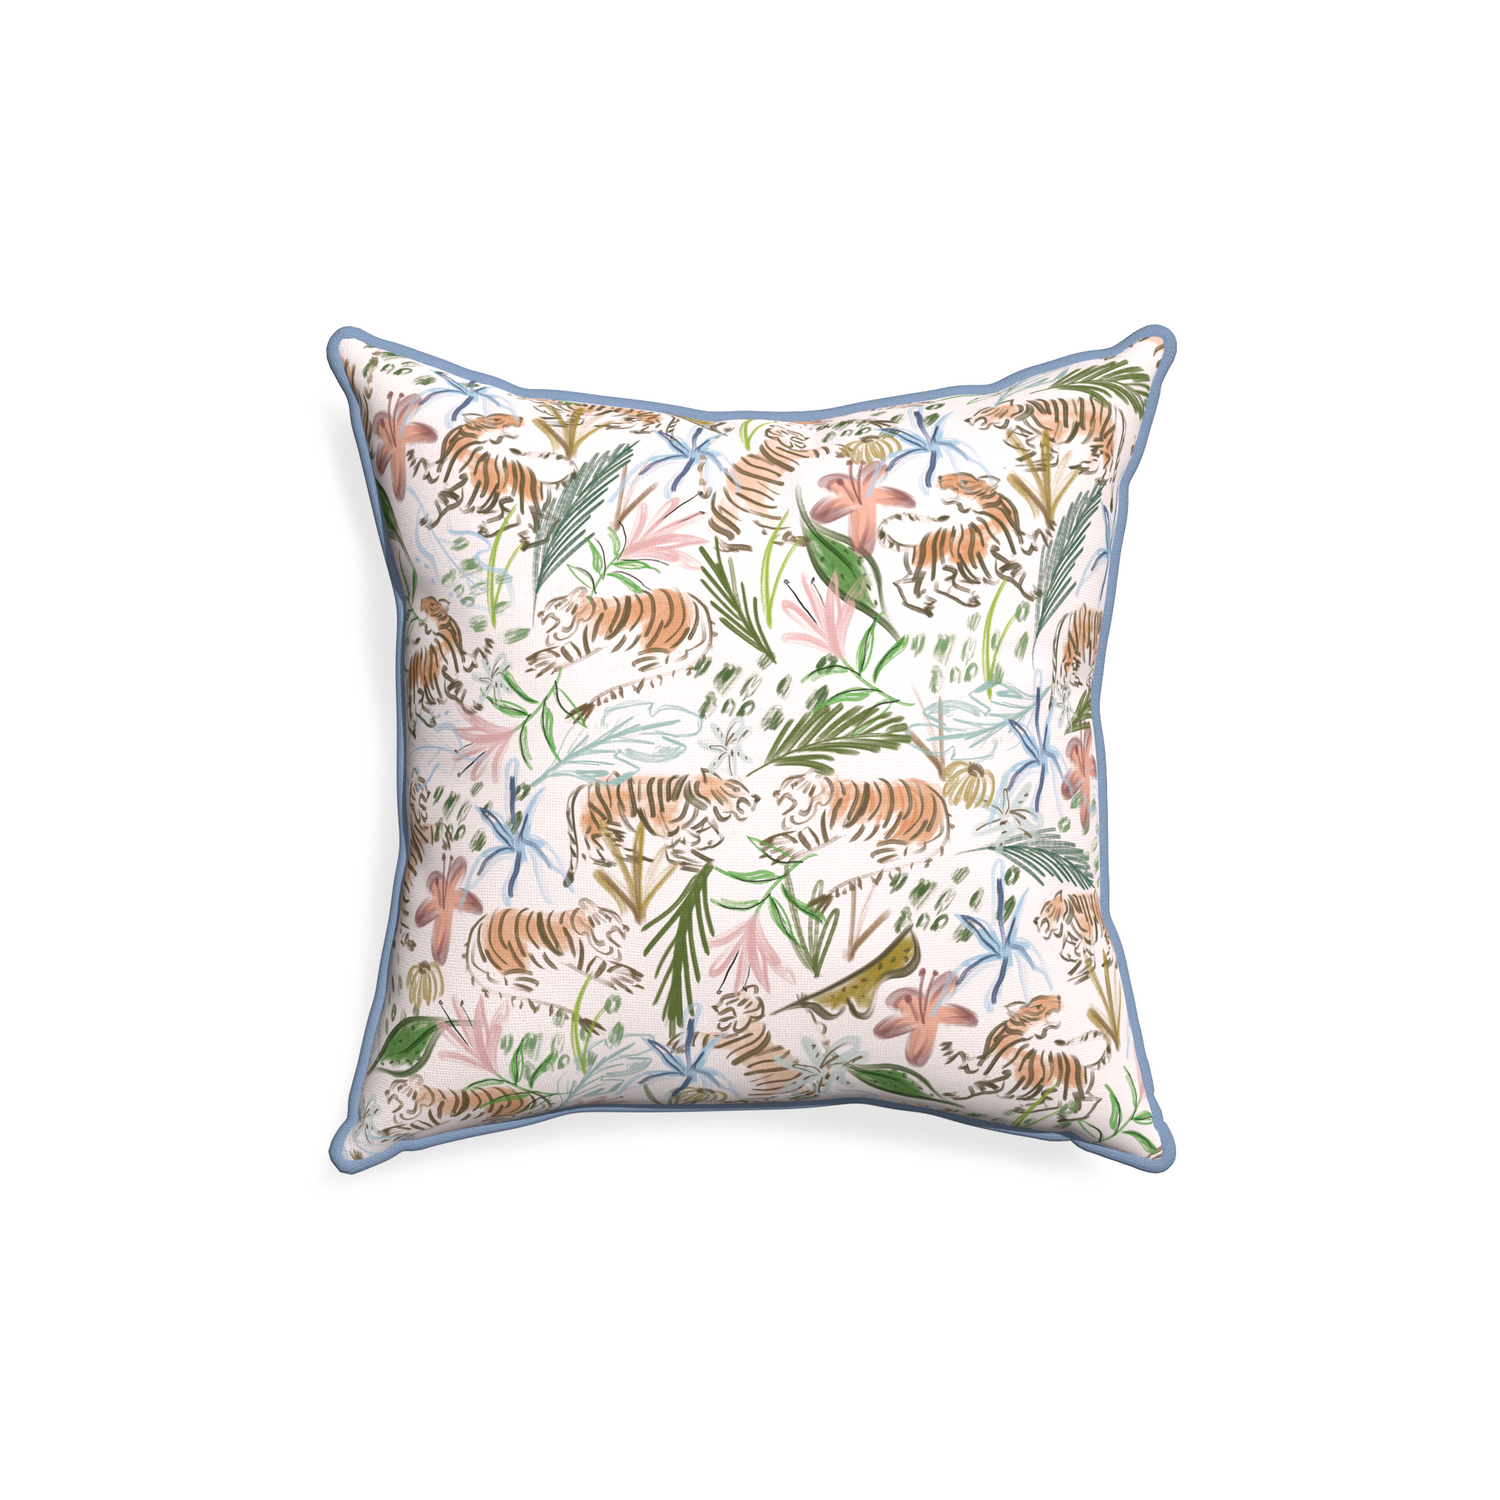 18-square frida pink custom pink chinoiserie tigerpillow with sky piping on white background